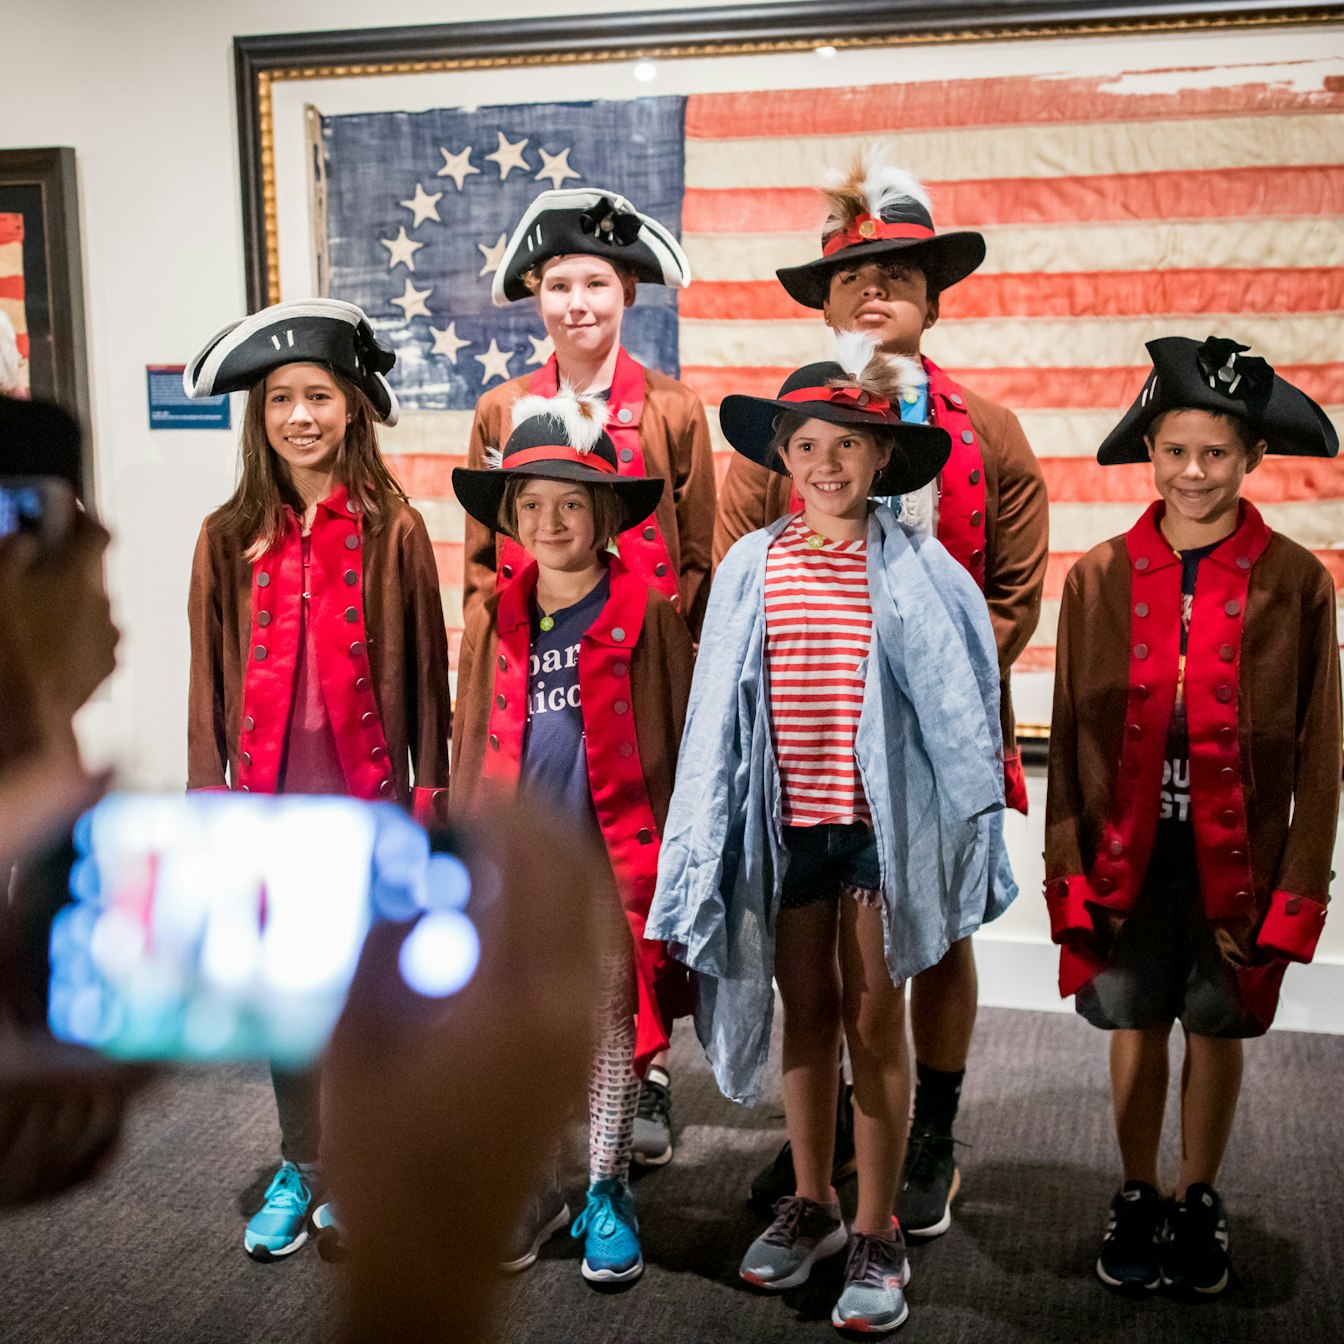 Six adolescents, wearing Revolutionary-era costumes, pose for a picture in front of a 13-star flag, which was part of the Museum's summer 2019 exhibition, A New Constellation.